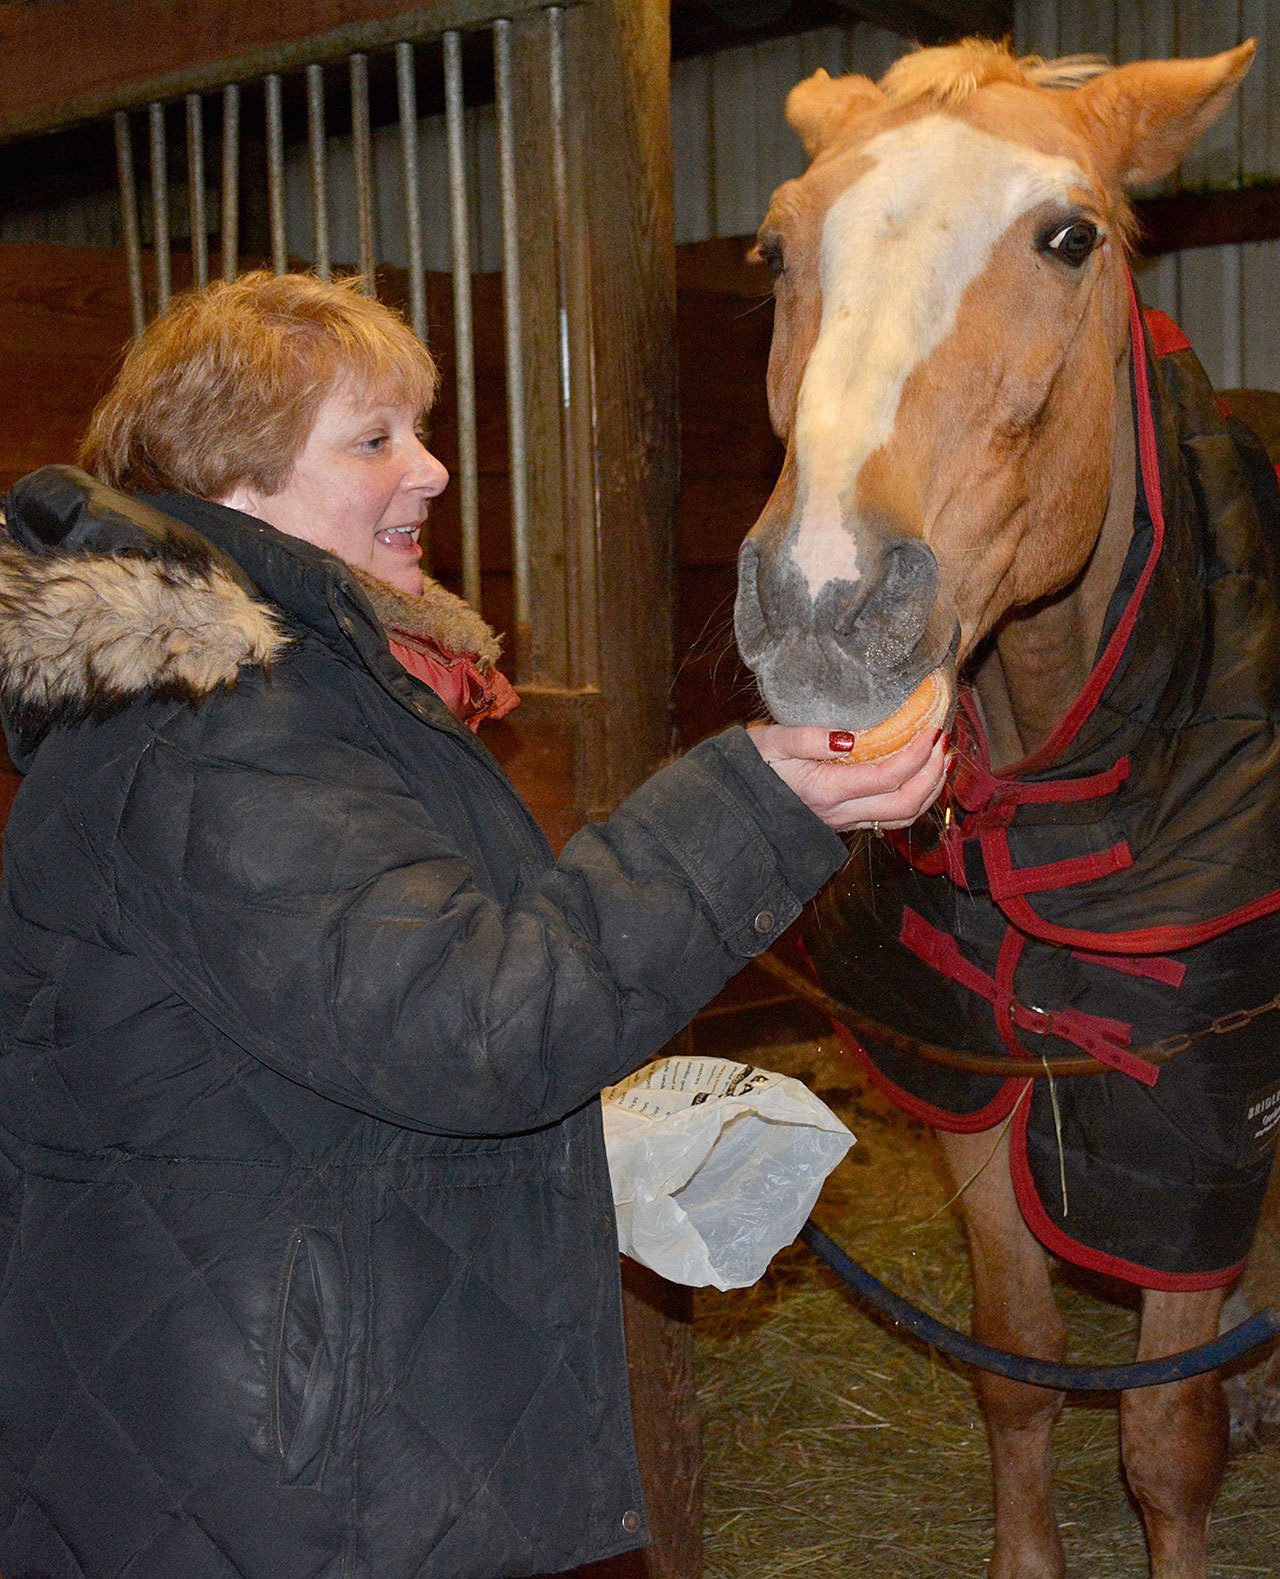 At Port Orchard’s Clover Valley Riding Center, this horse works for donuts